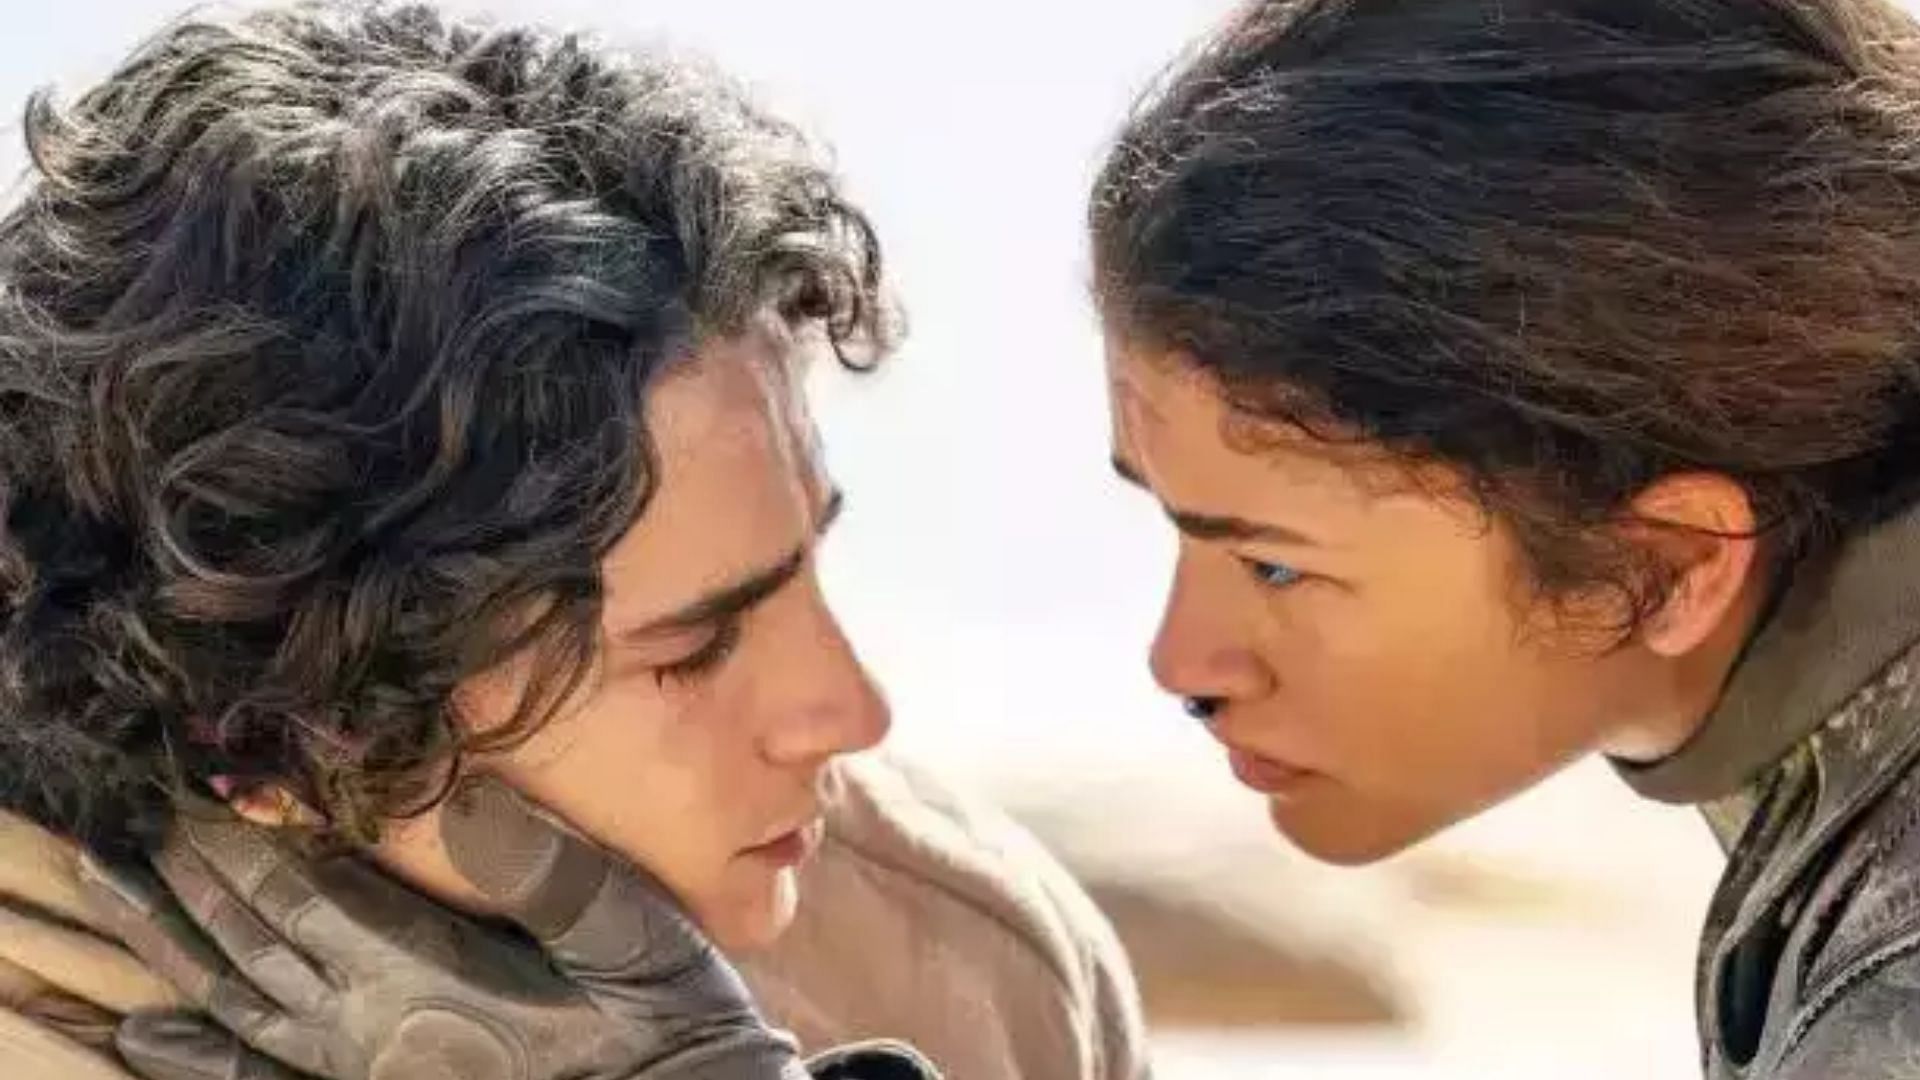 The primary protagonists of Dune 2, played by Timothy Chalamet and Zendaya (Image via Legendary Pictures)